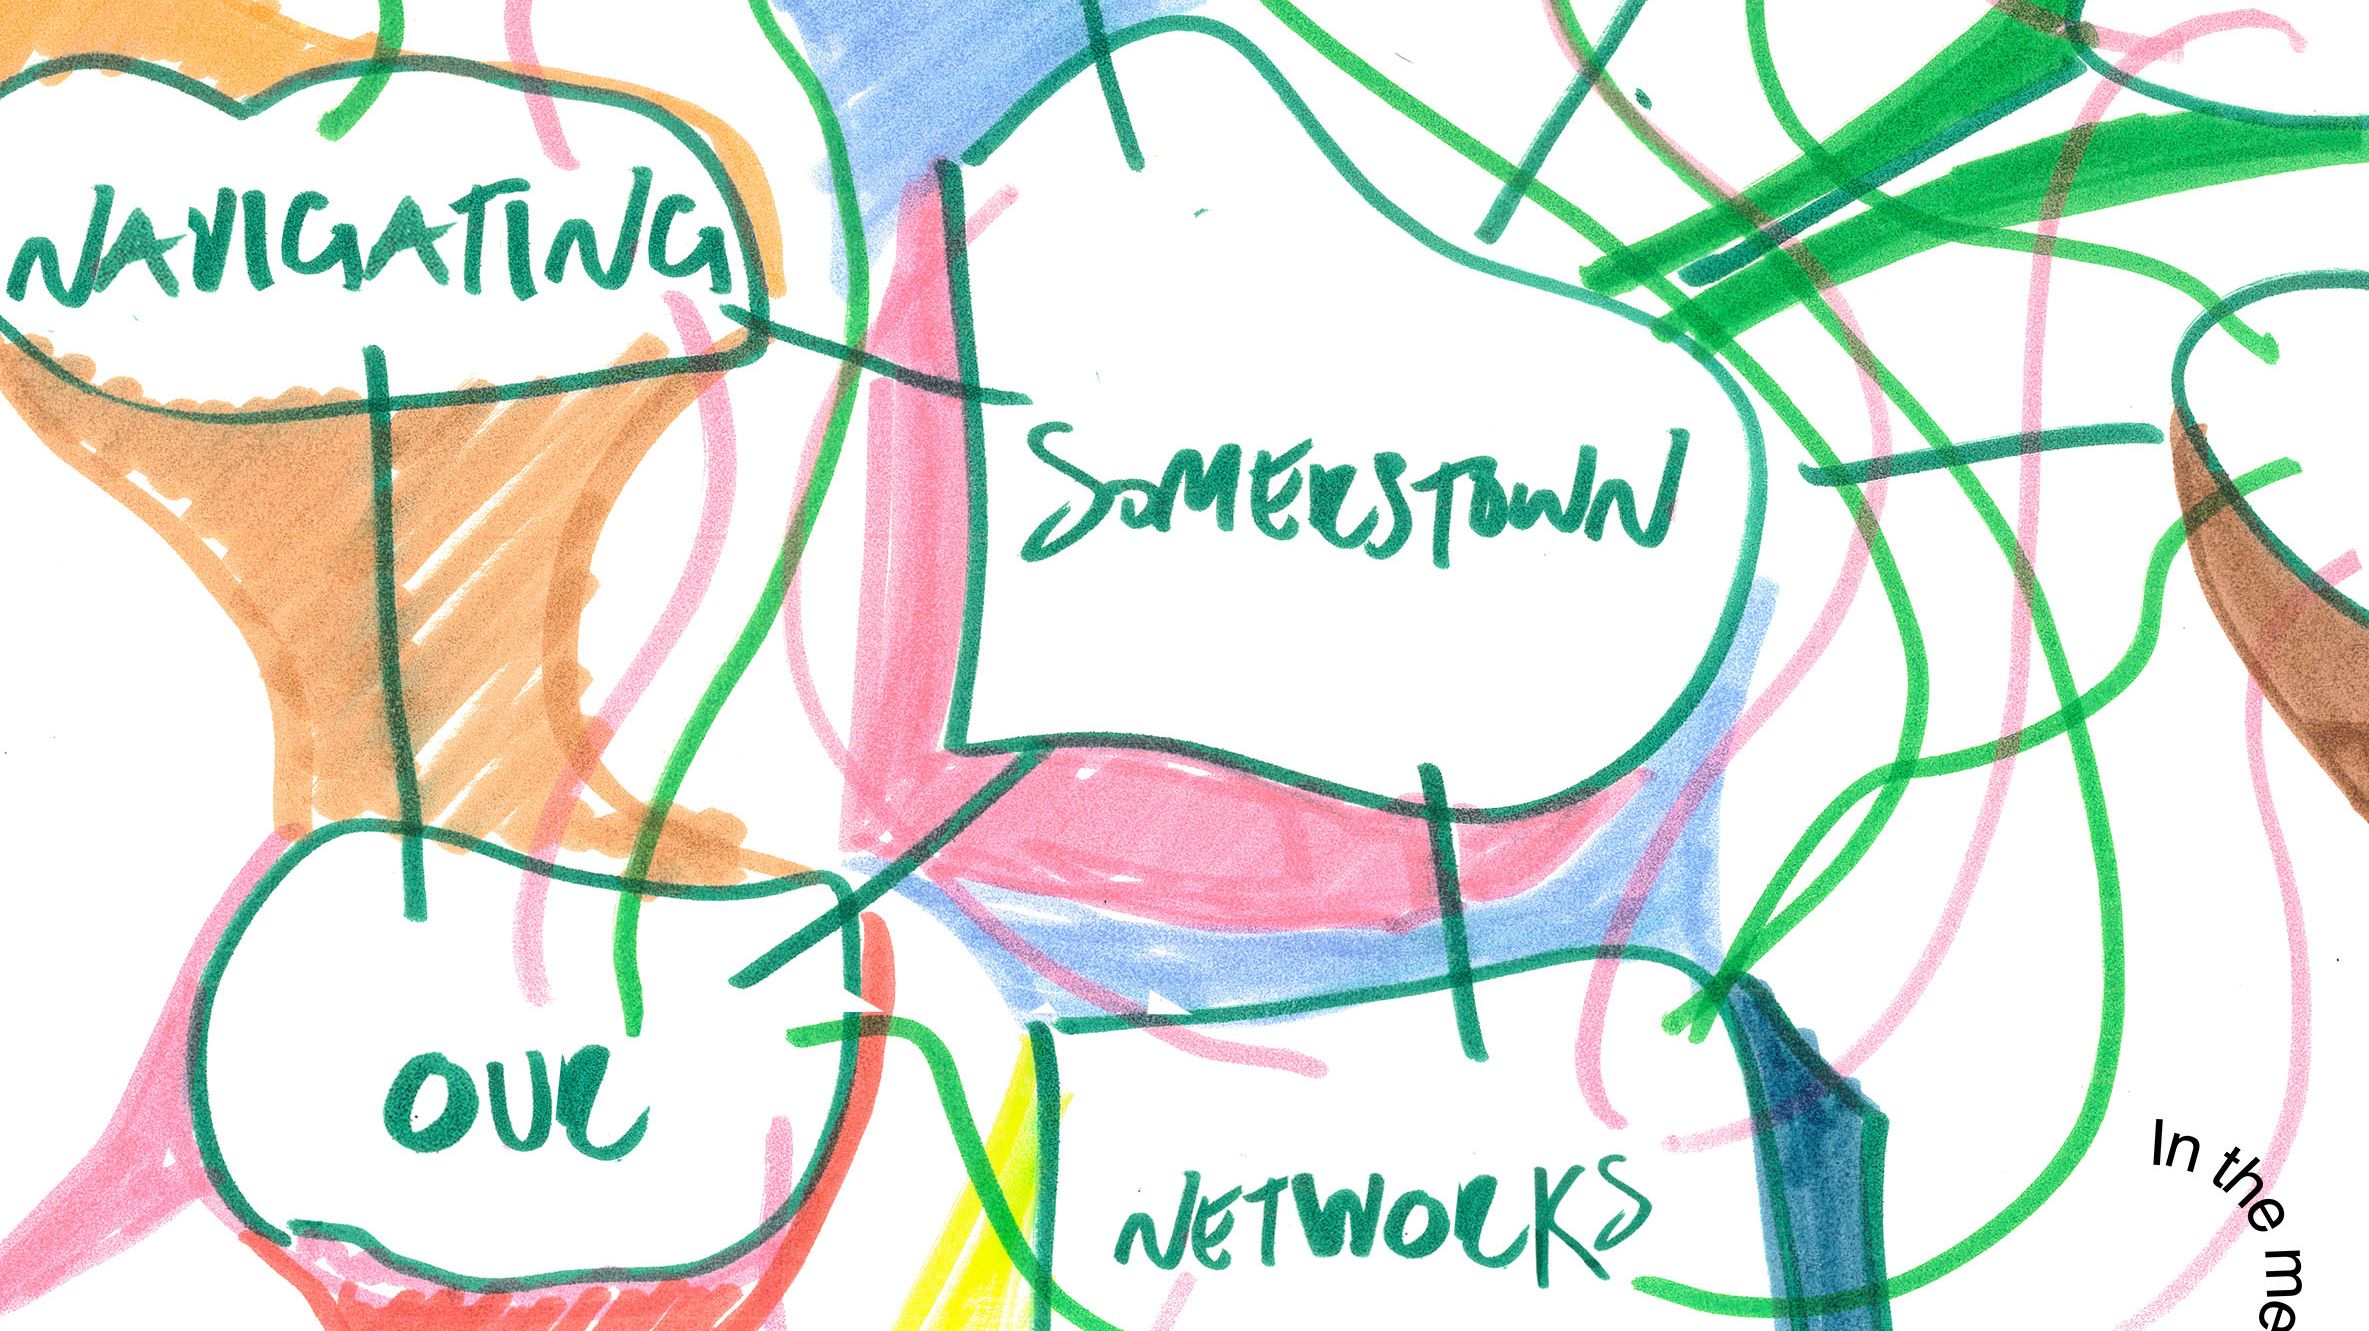 Diagram illustrating Navigating Our Somers Town Networks